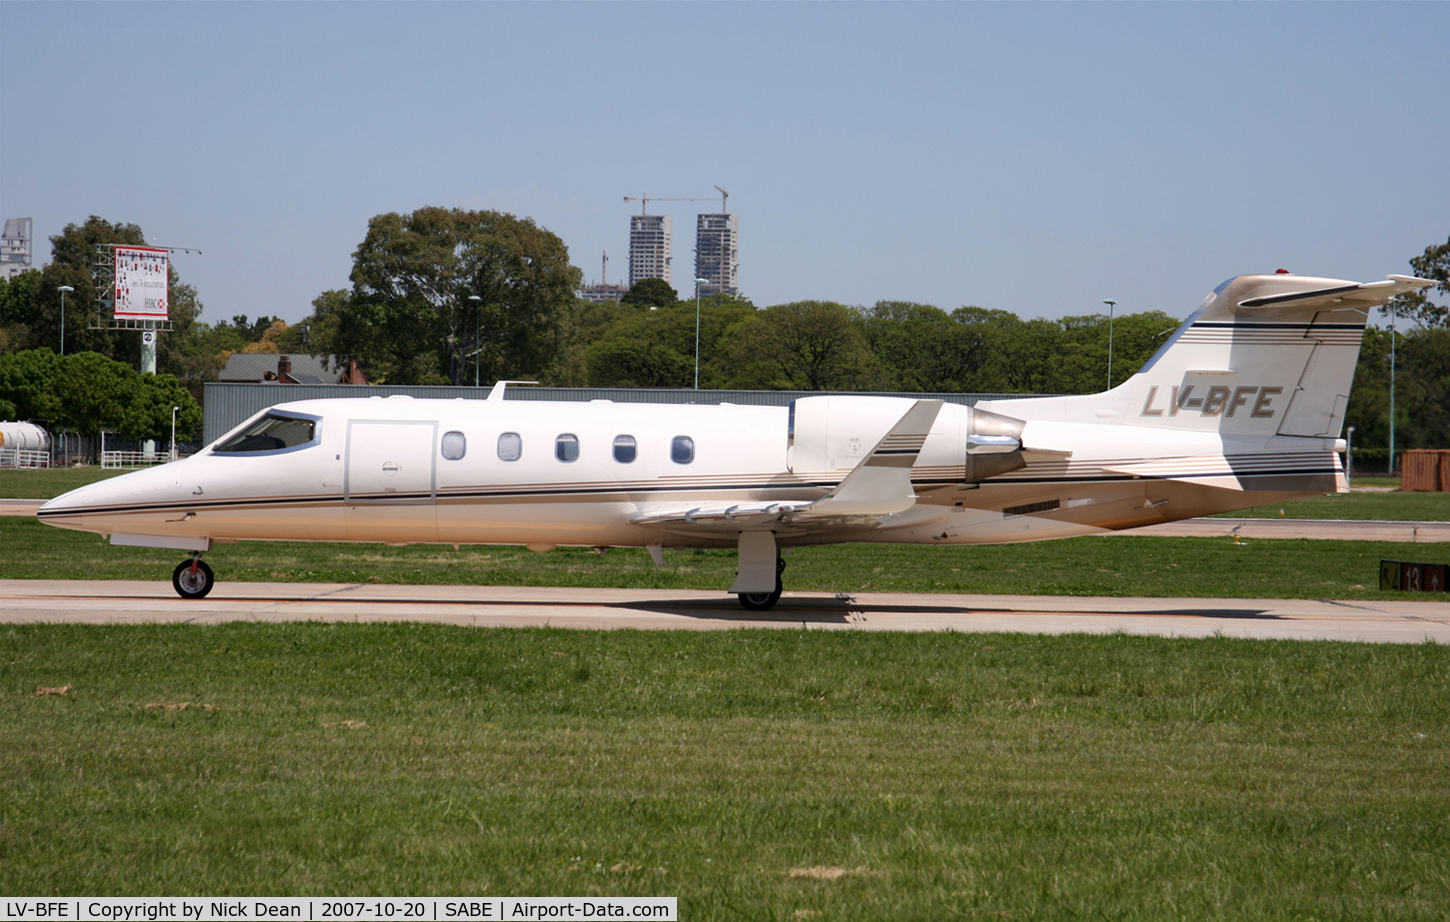 LV-BFE, 1999 Learjet 31A C/N 31A-183, SABE